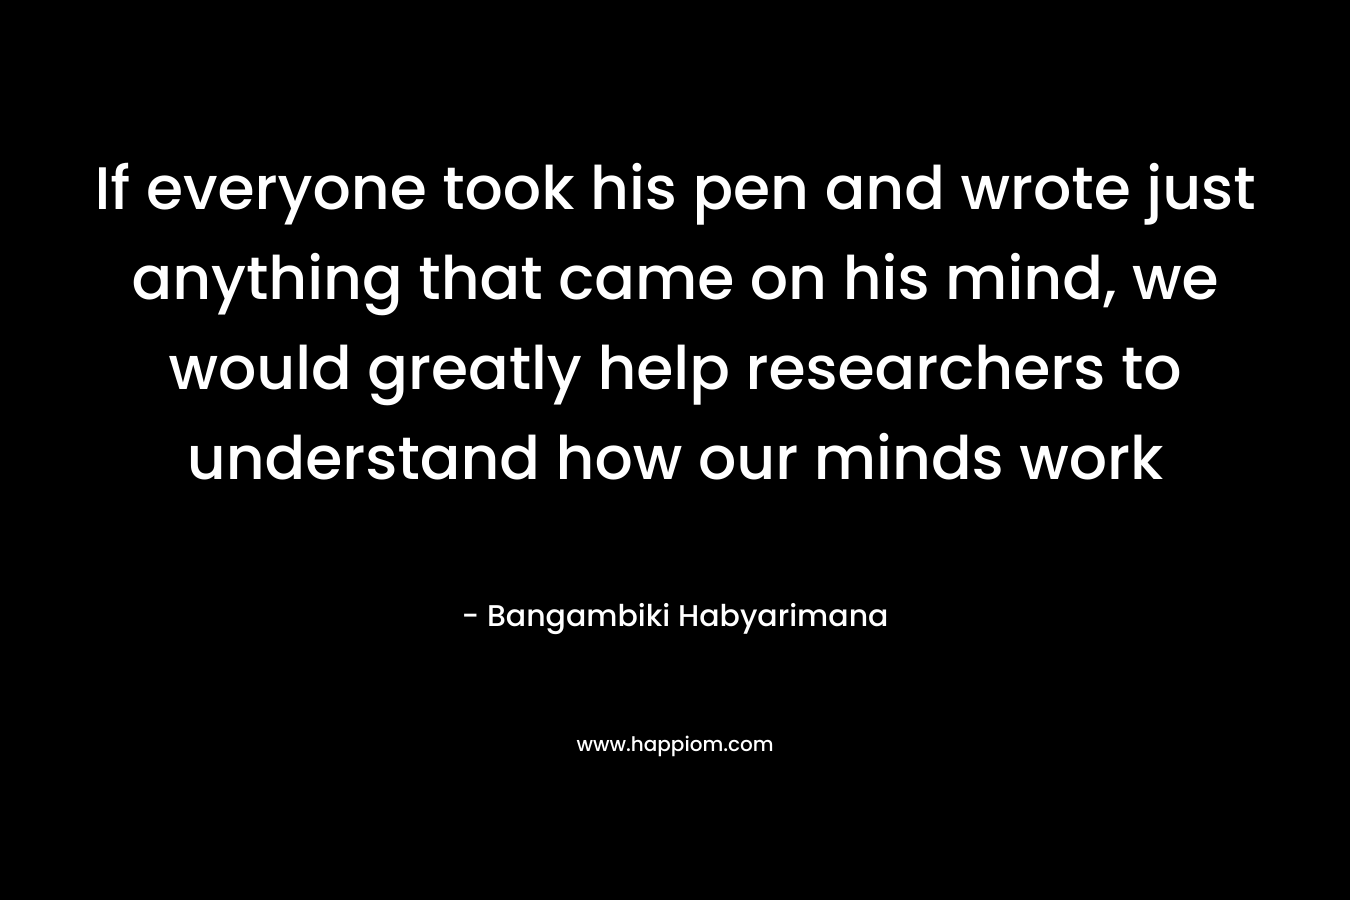 If everyone took his pen and wrote just anything that came on his mind, we would greatly help researchers to understand how our minds work